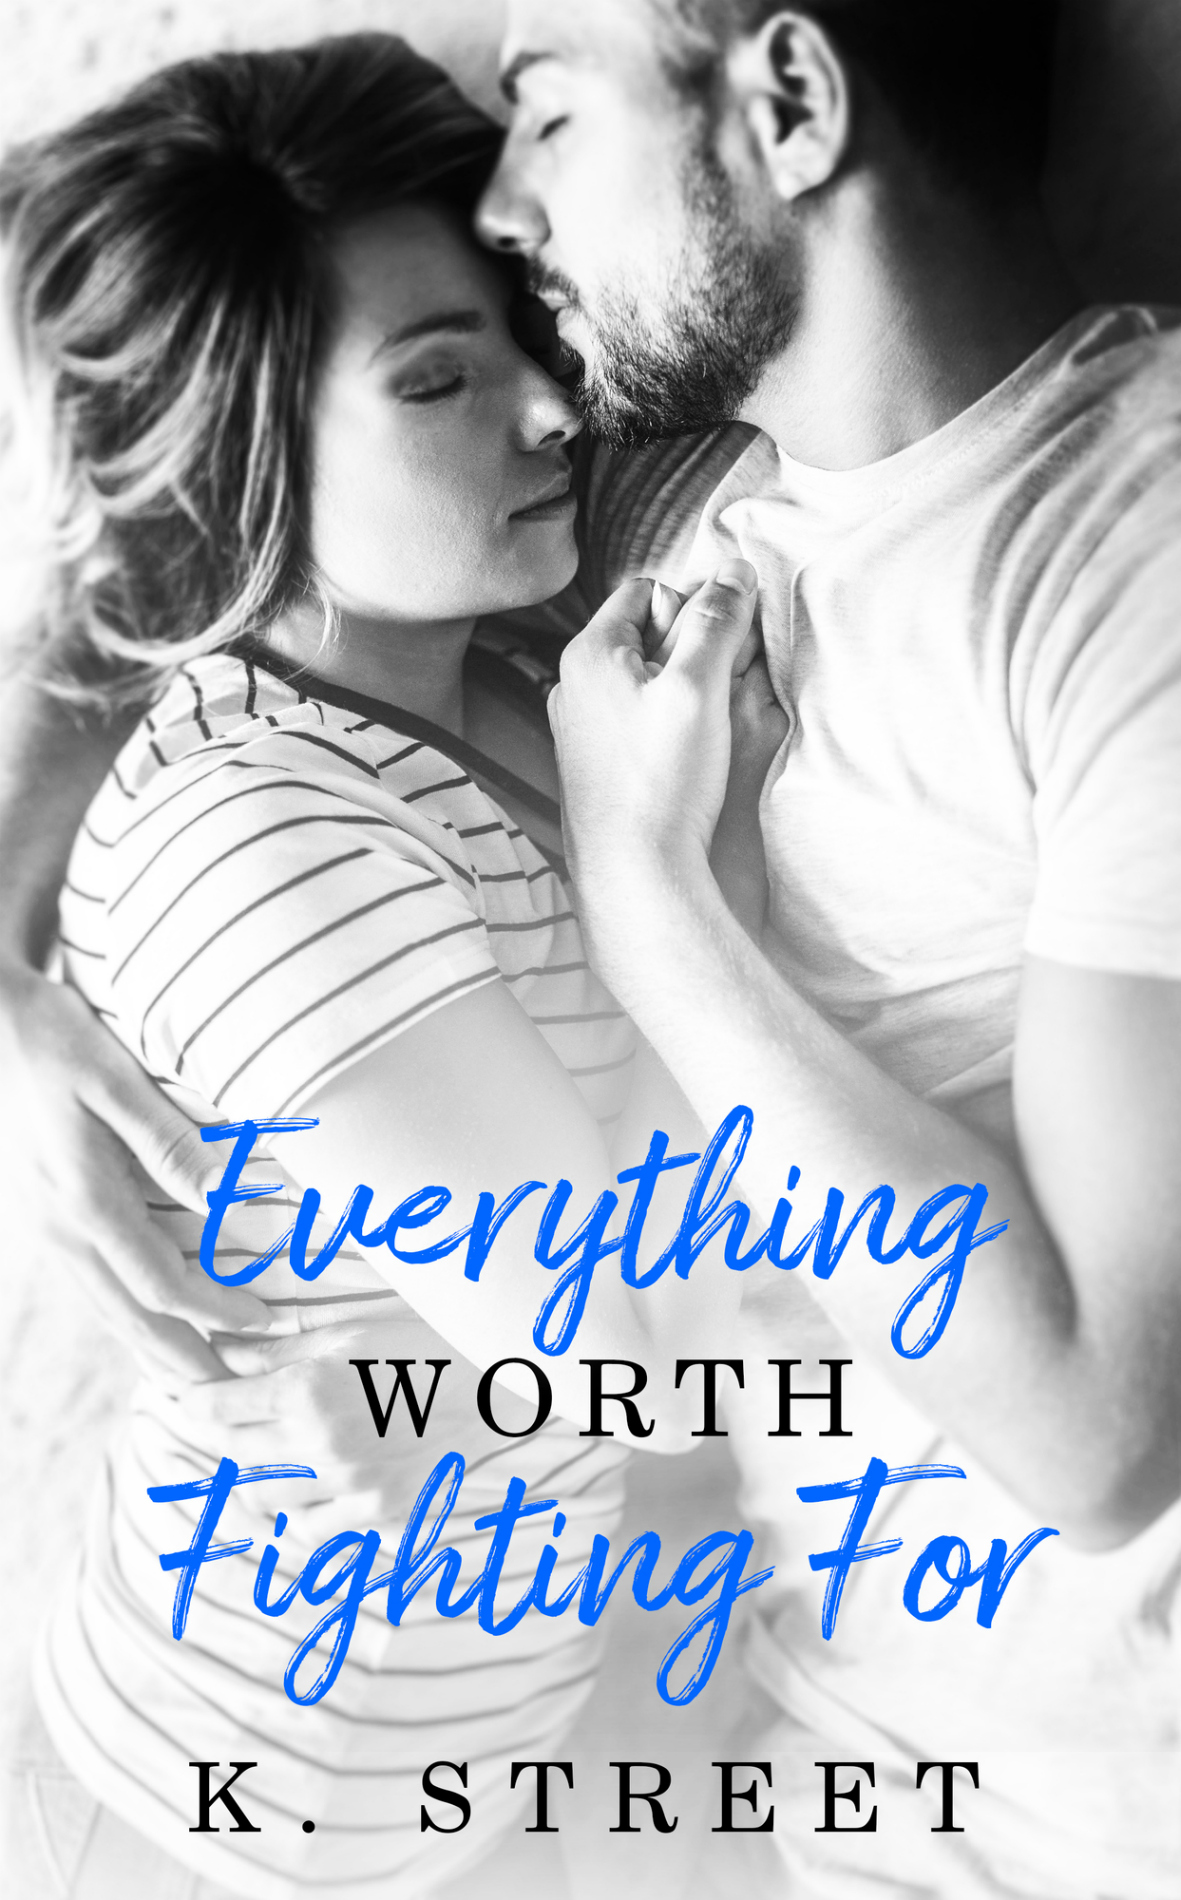 Everything Worth Fighting For by K. Street [Release Blitz]